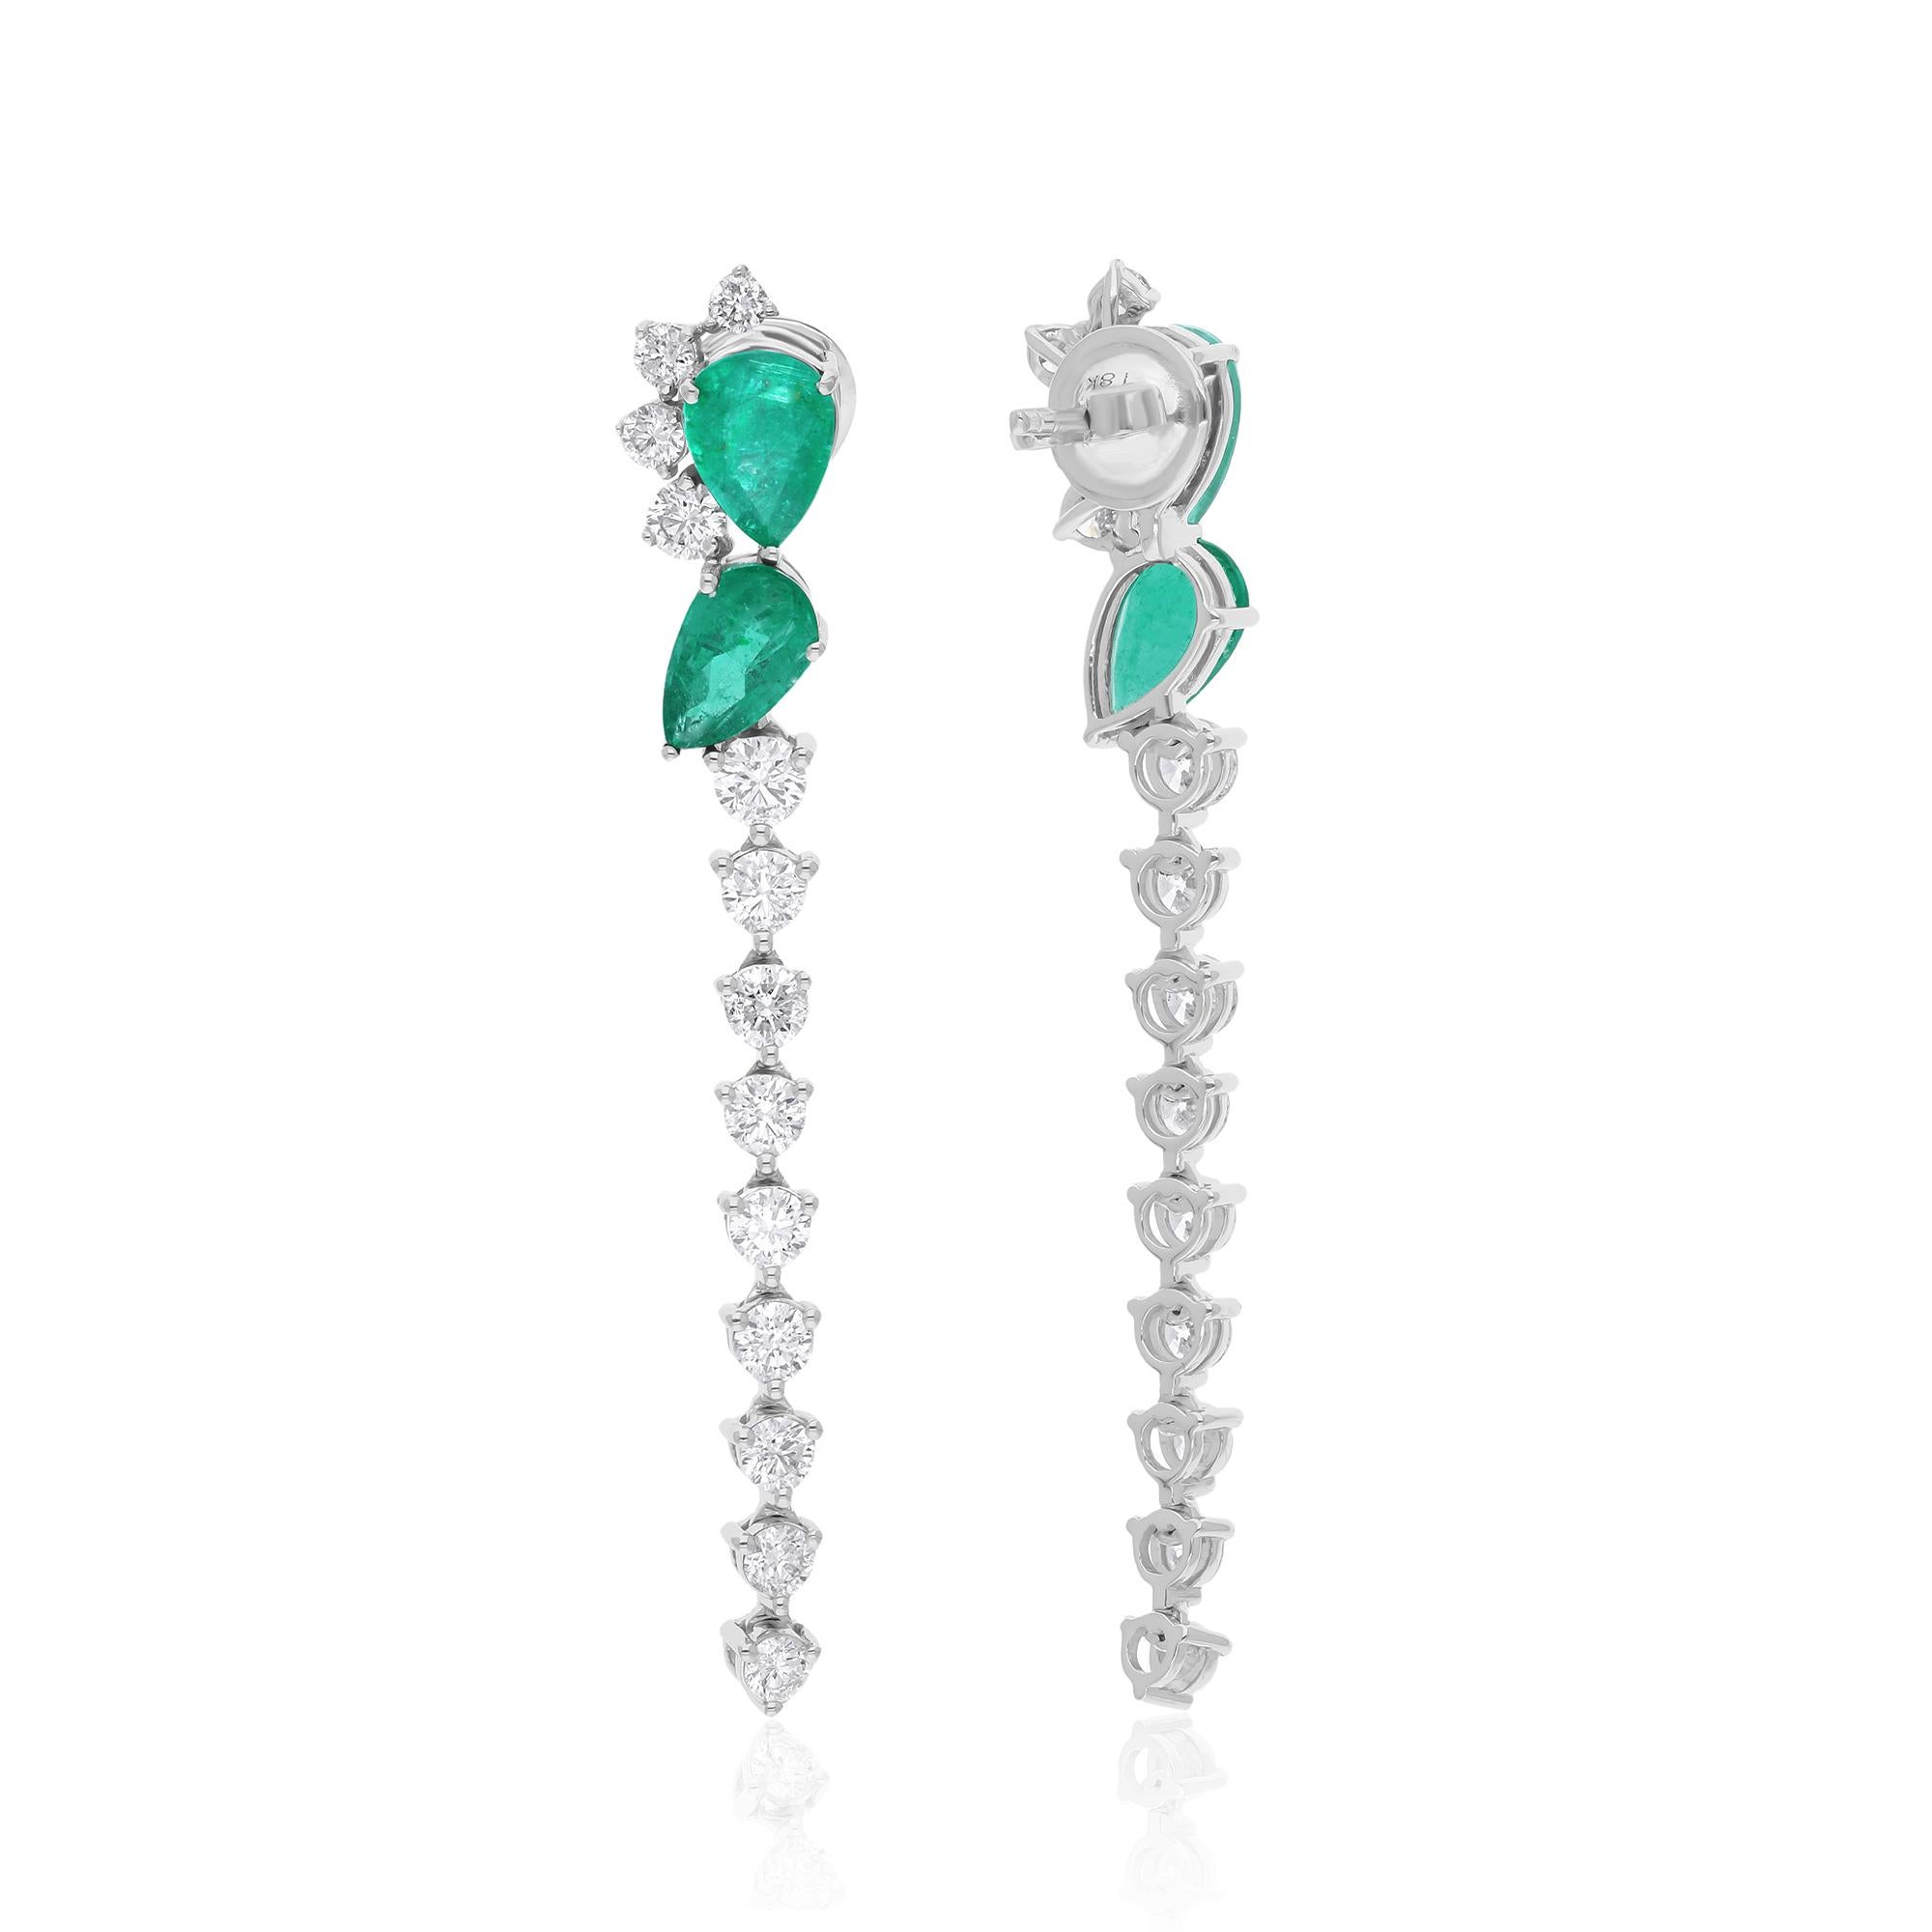 The centerpiece of these exquisite earrings is the Zambian emerald, renowned for its captivating green hue and remarkable clarity. Sourced from the rich mines of Zambia, each emerald exudes a natural allure that enchants the beholder. The emeralds